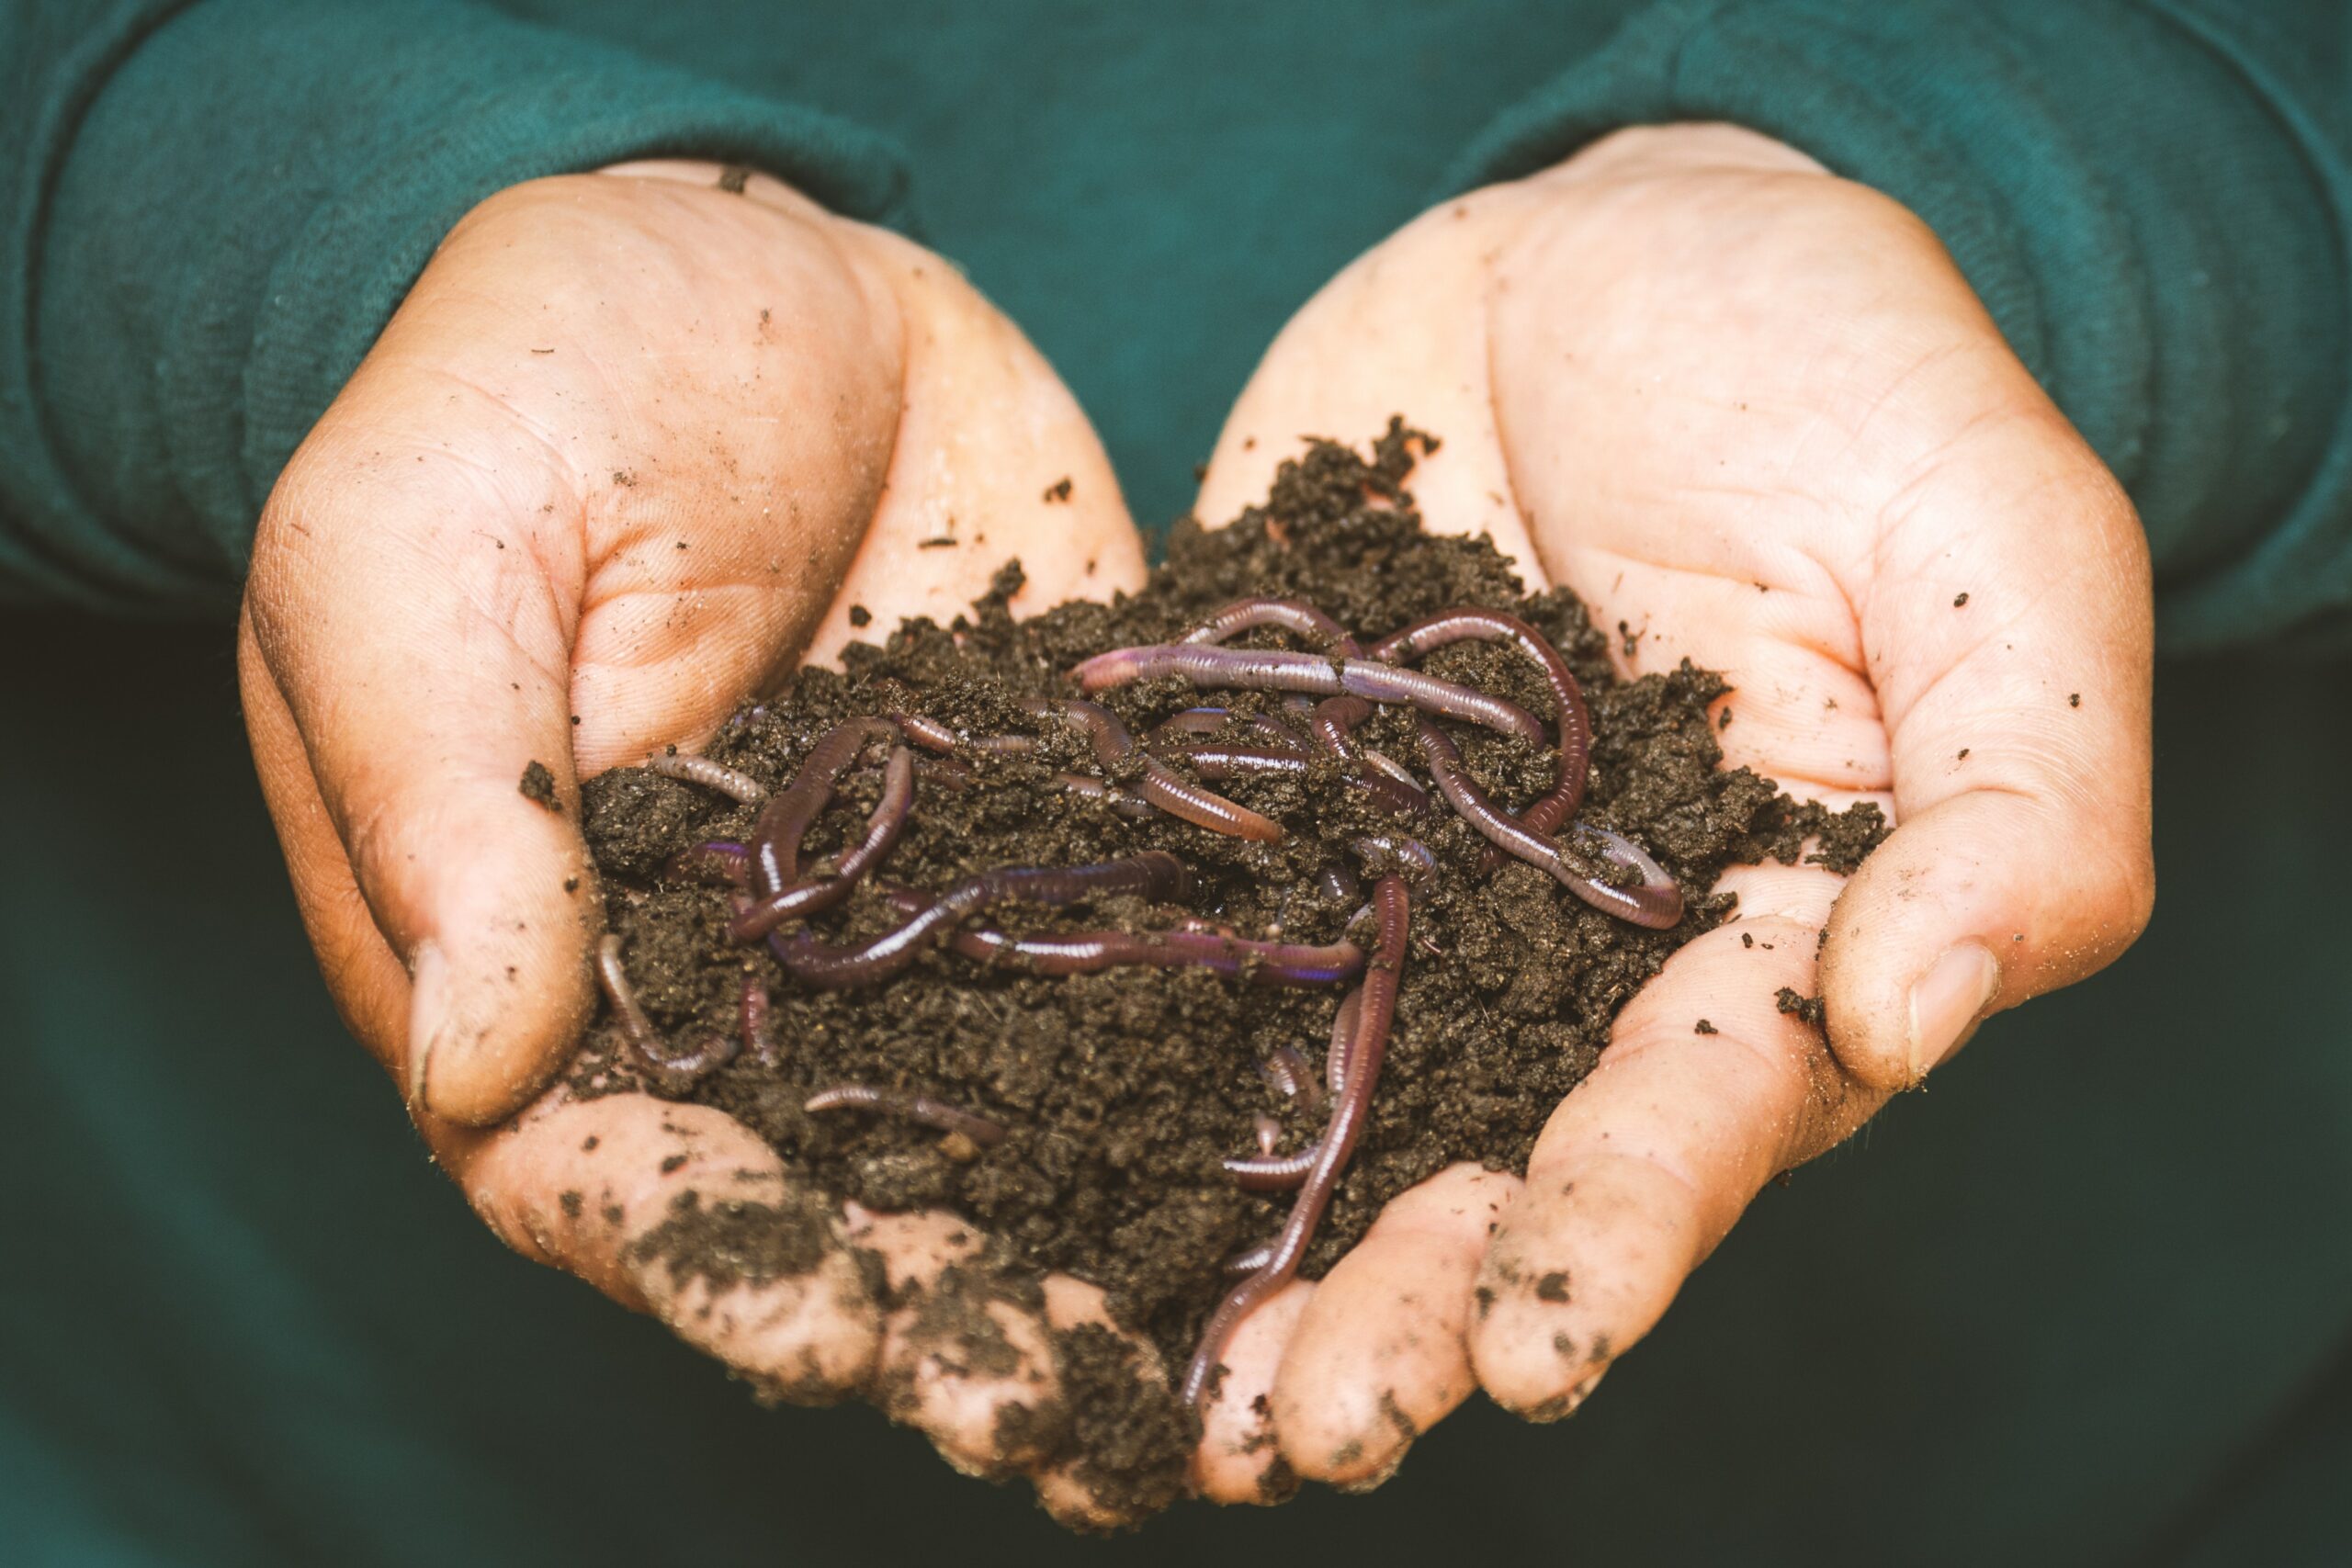 What Do Worms Eat & Drink?